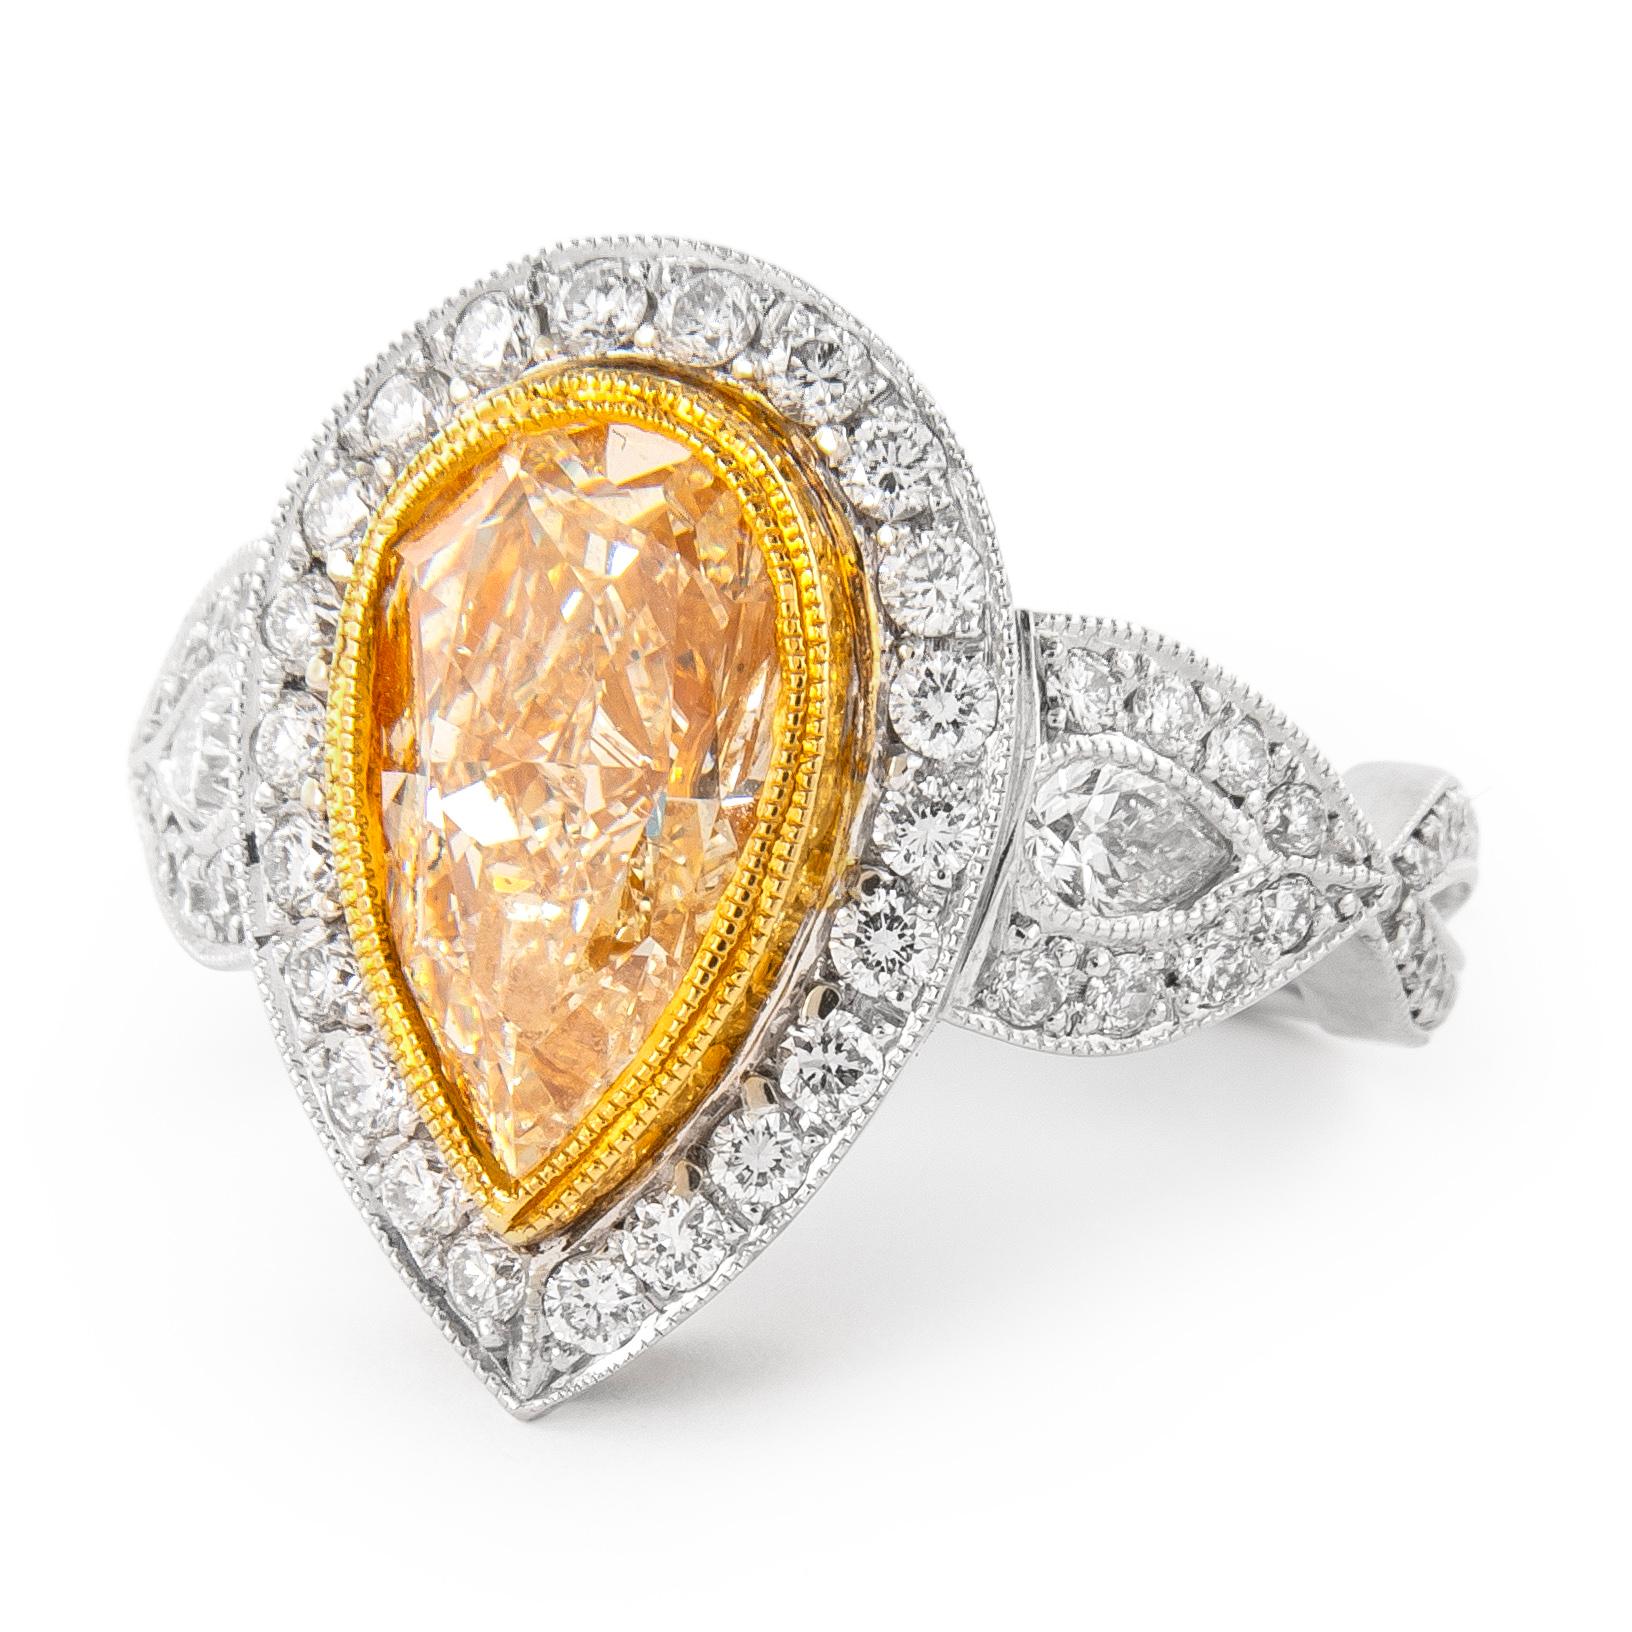 Beautiful pear fancy yellow diamond three-stone with halo ring, two-tone 18k yellow and white gold with milgrain work. High jewelry by Alexander Beverly Hills.
6.56 carats total diamond weight.
4.06 carat pear shape, approximately Fancy Yellow color